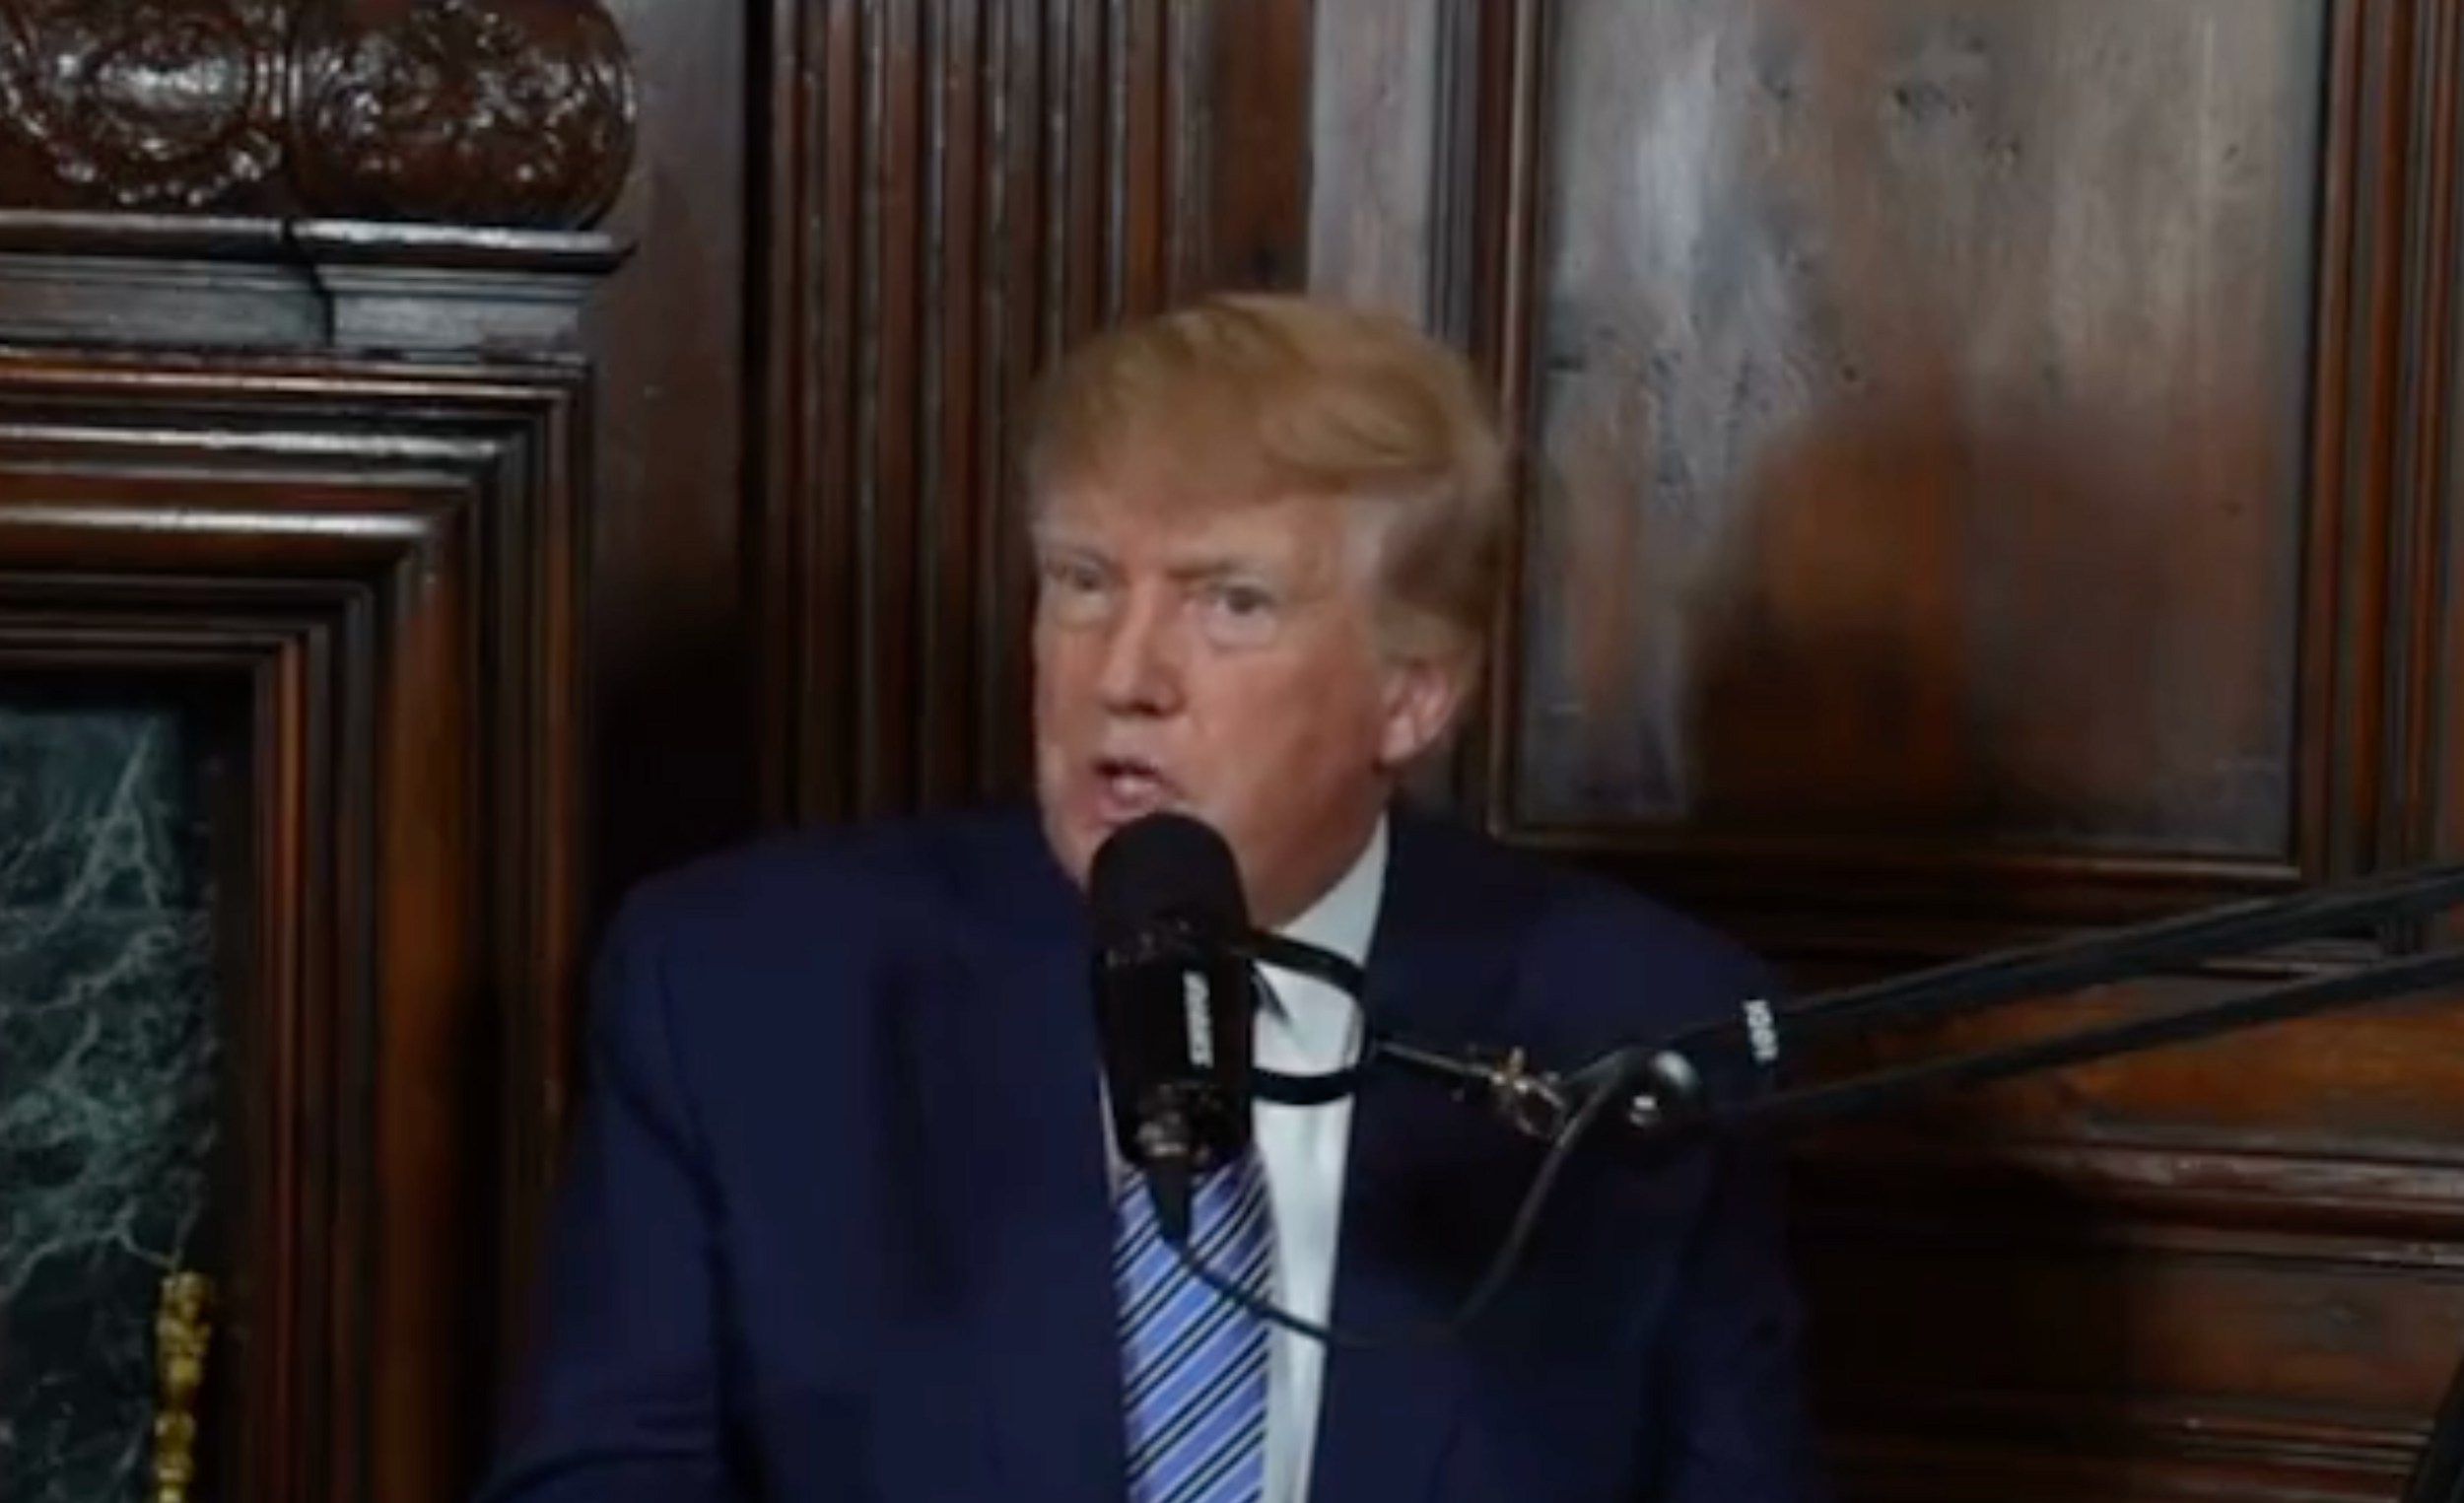 Trump Mocked for Bonkers Rant About Windmills in Response to Question About Ukraine Invasion